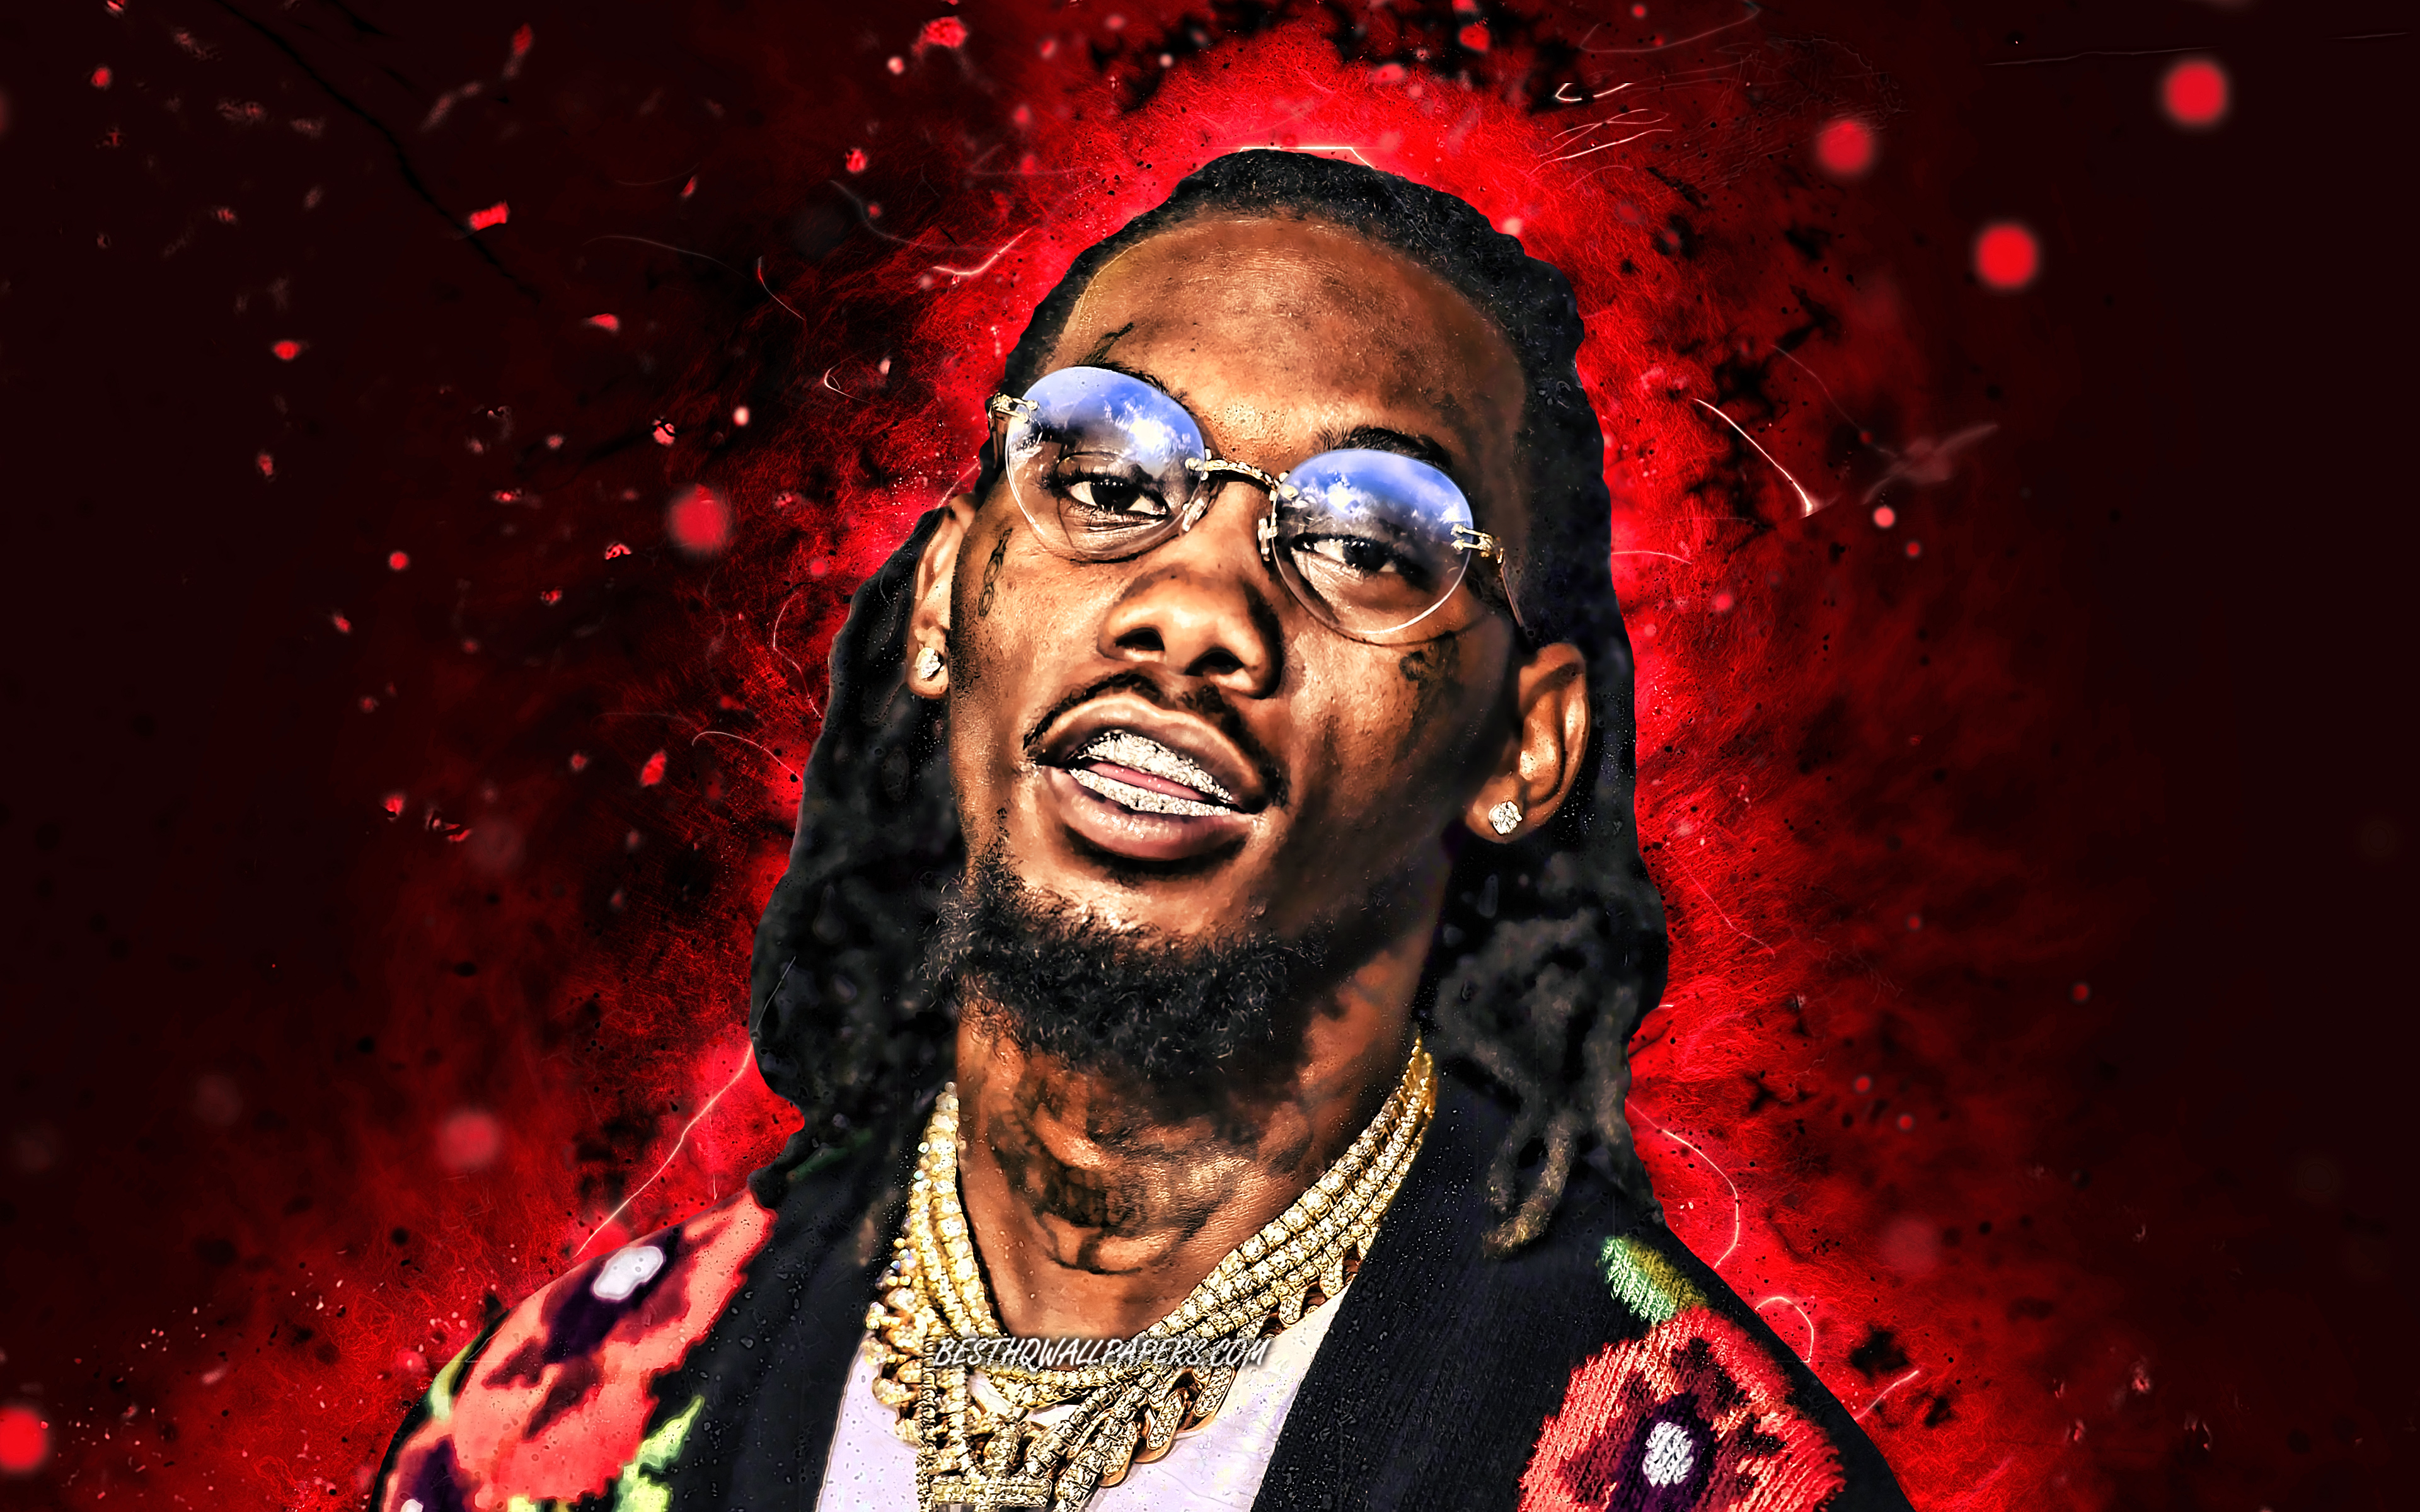 Download wallpaper 4k, Offset, american rapper, red neon lights, music stars, creative, fan art, american celebrity, Kiari Kendrell Cephus, Offset 4K for desktop with resolution 3840x2400. High Quality HD picture wallpaper